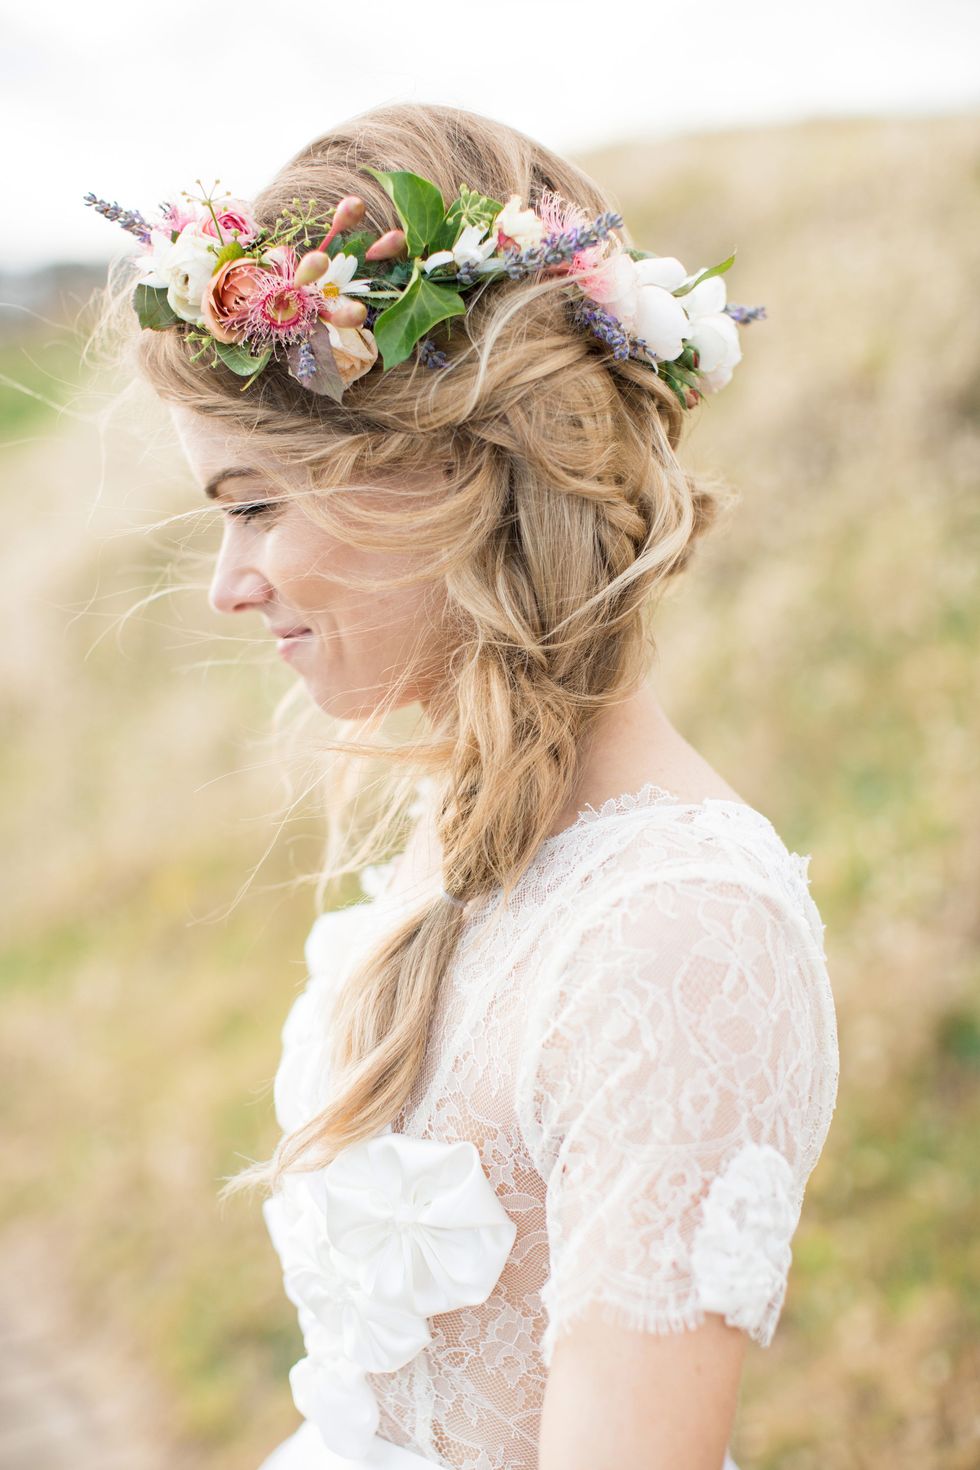 Petal, Hair accessory, Dress, Headpiece, People in nature, Headgear, Beauty, Photography, Spring, Bride, 